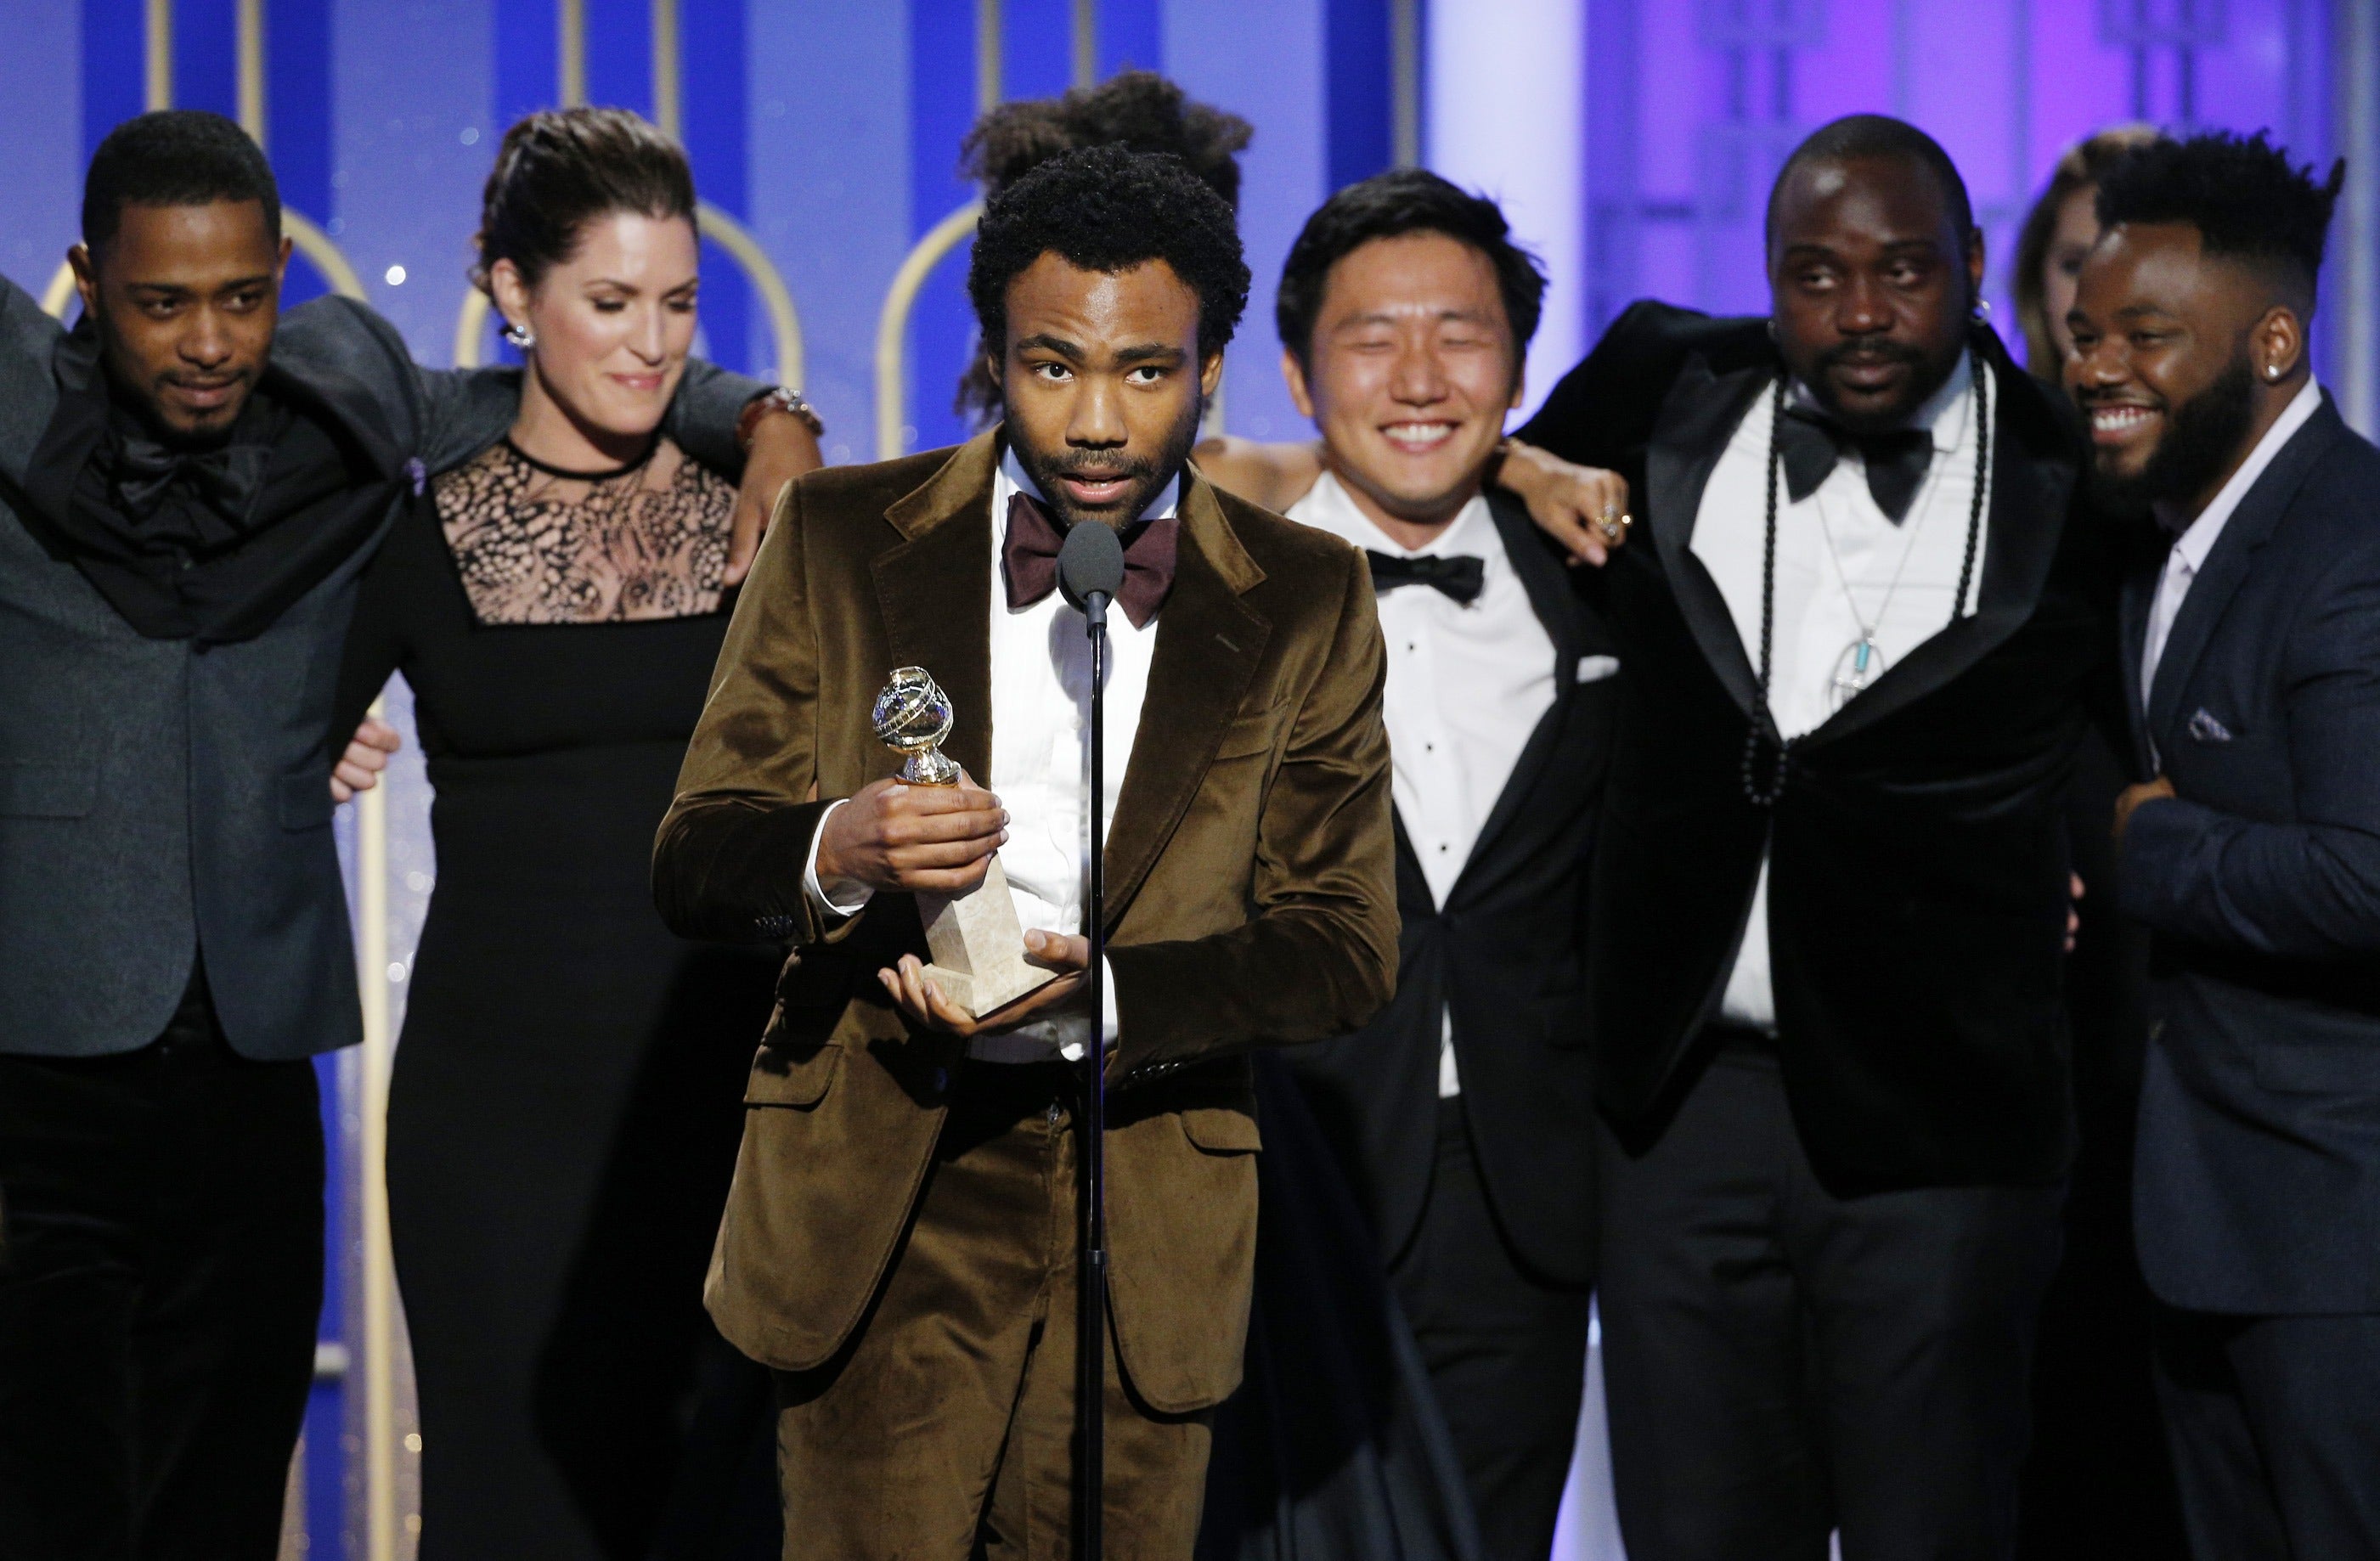 ‘Atlanta’ Will Return With Two New Seasons in 2021